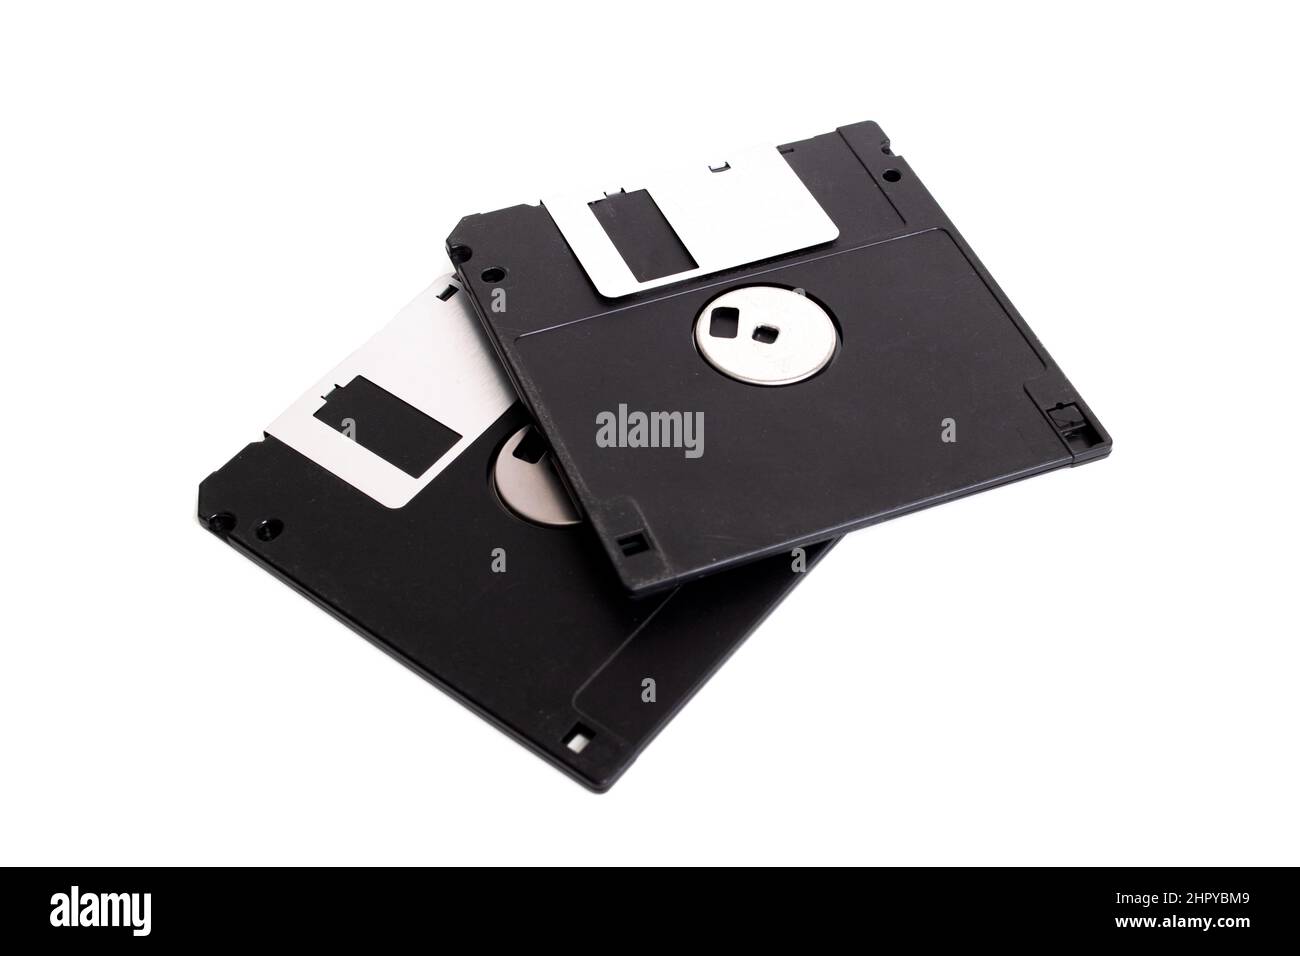 Two floppy disks isolated on white background Stock Photo